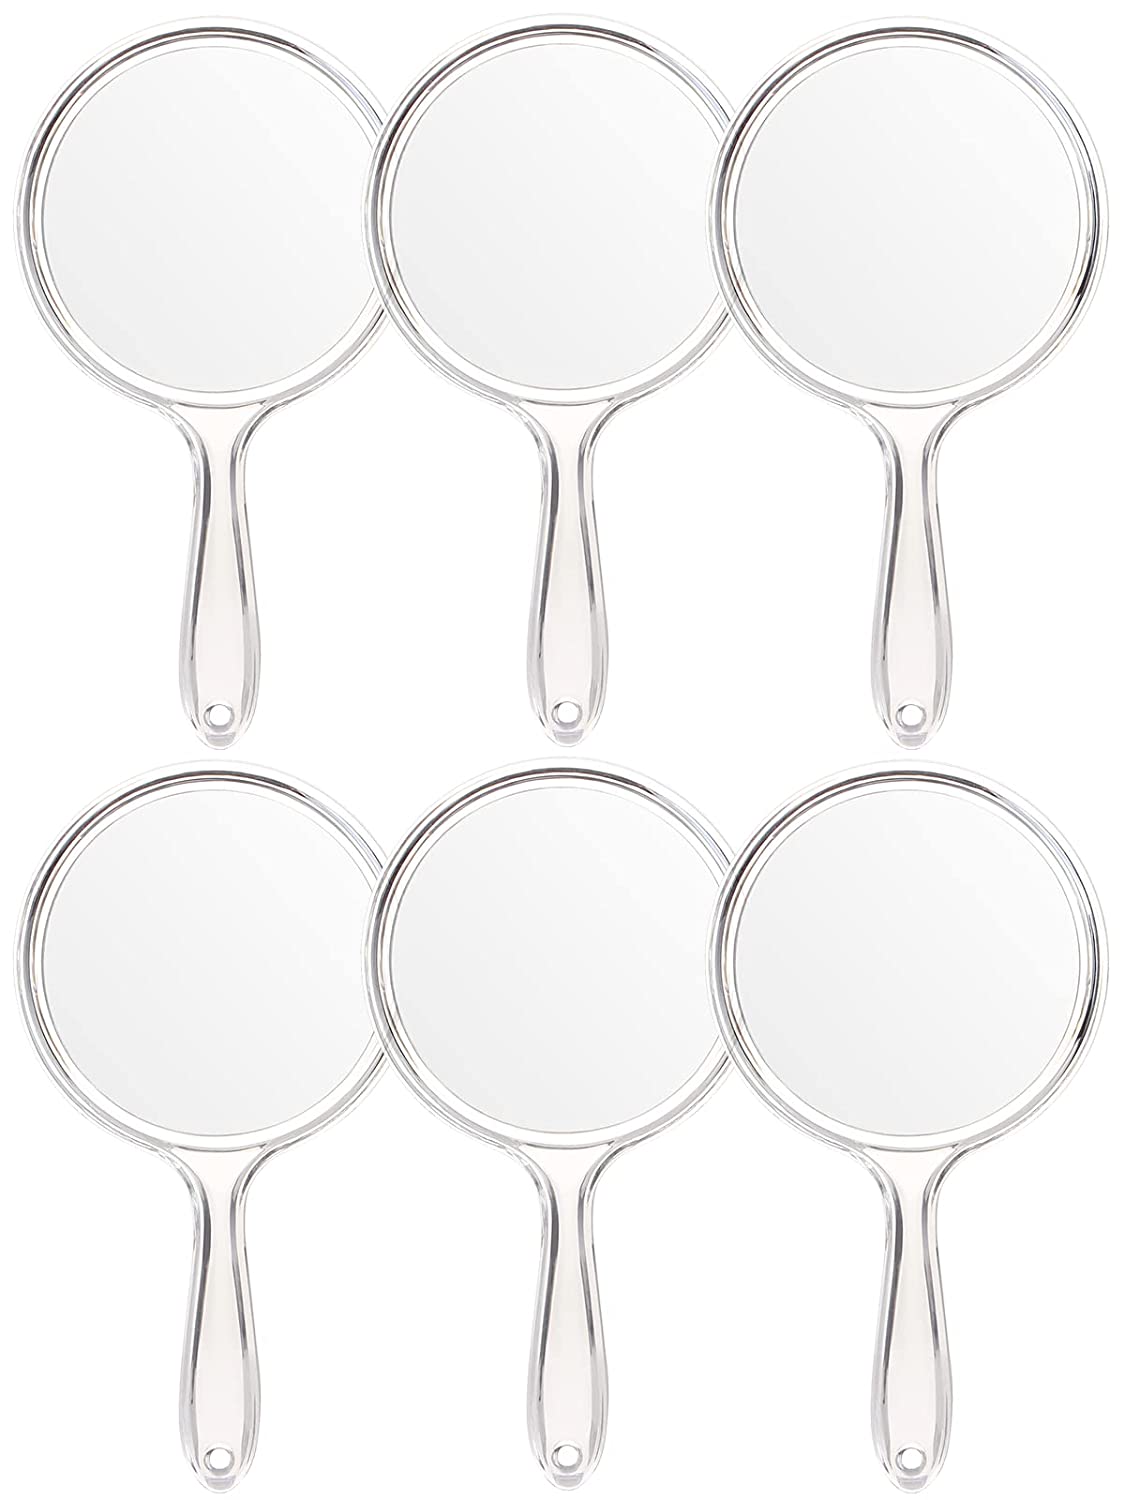 OMIRO Hand Mirror, Double-Sided Handheld Mirror 1X/3X Magnifying Mirror with Handle, Set of 3